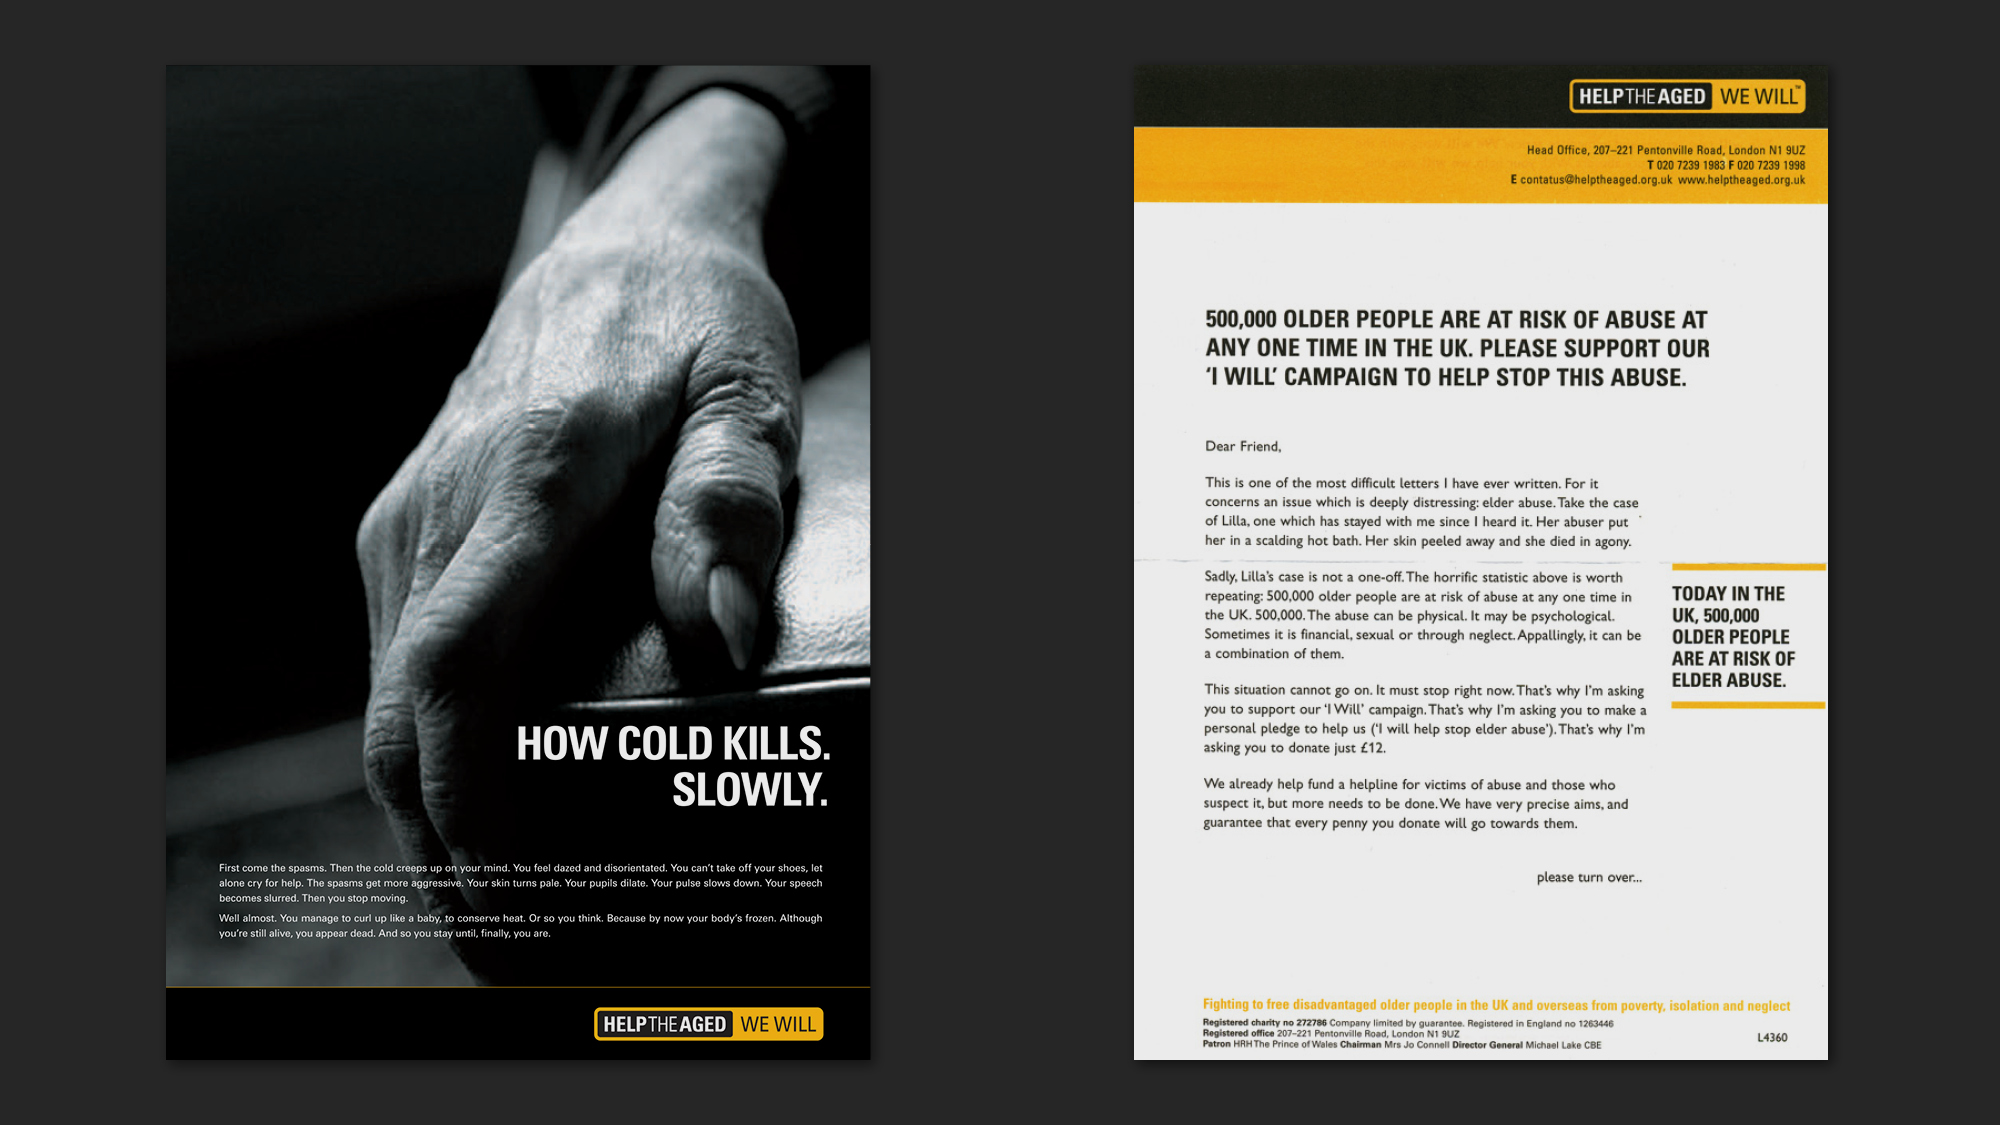 Entity-3-Three-Brand-Design-Agency-Sydney-Help-the-Aged-7-experience-print-campaign-letter